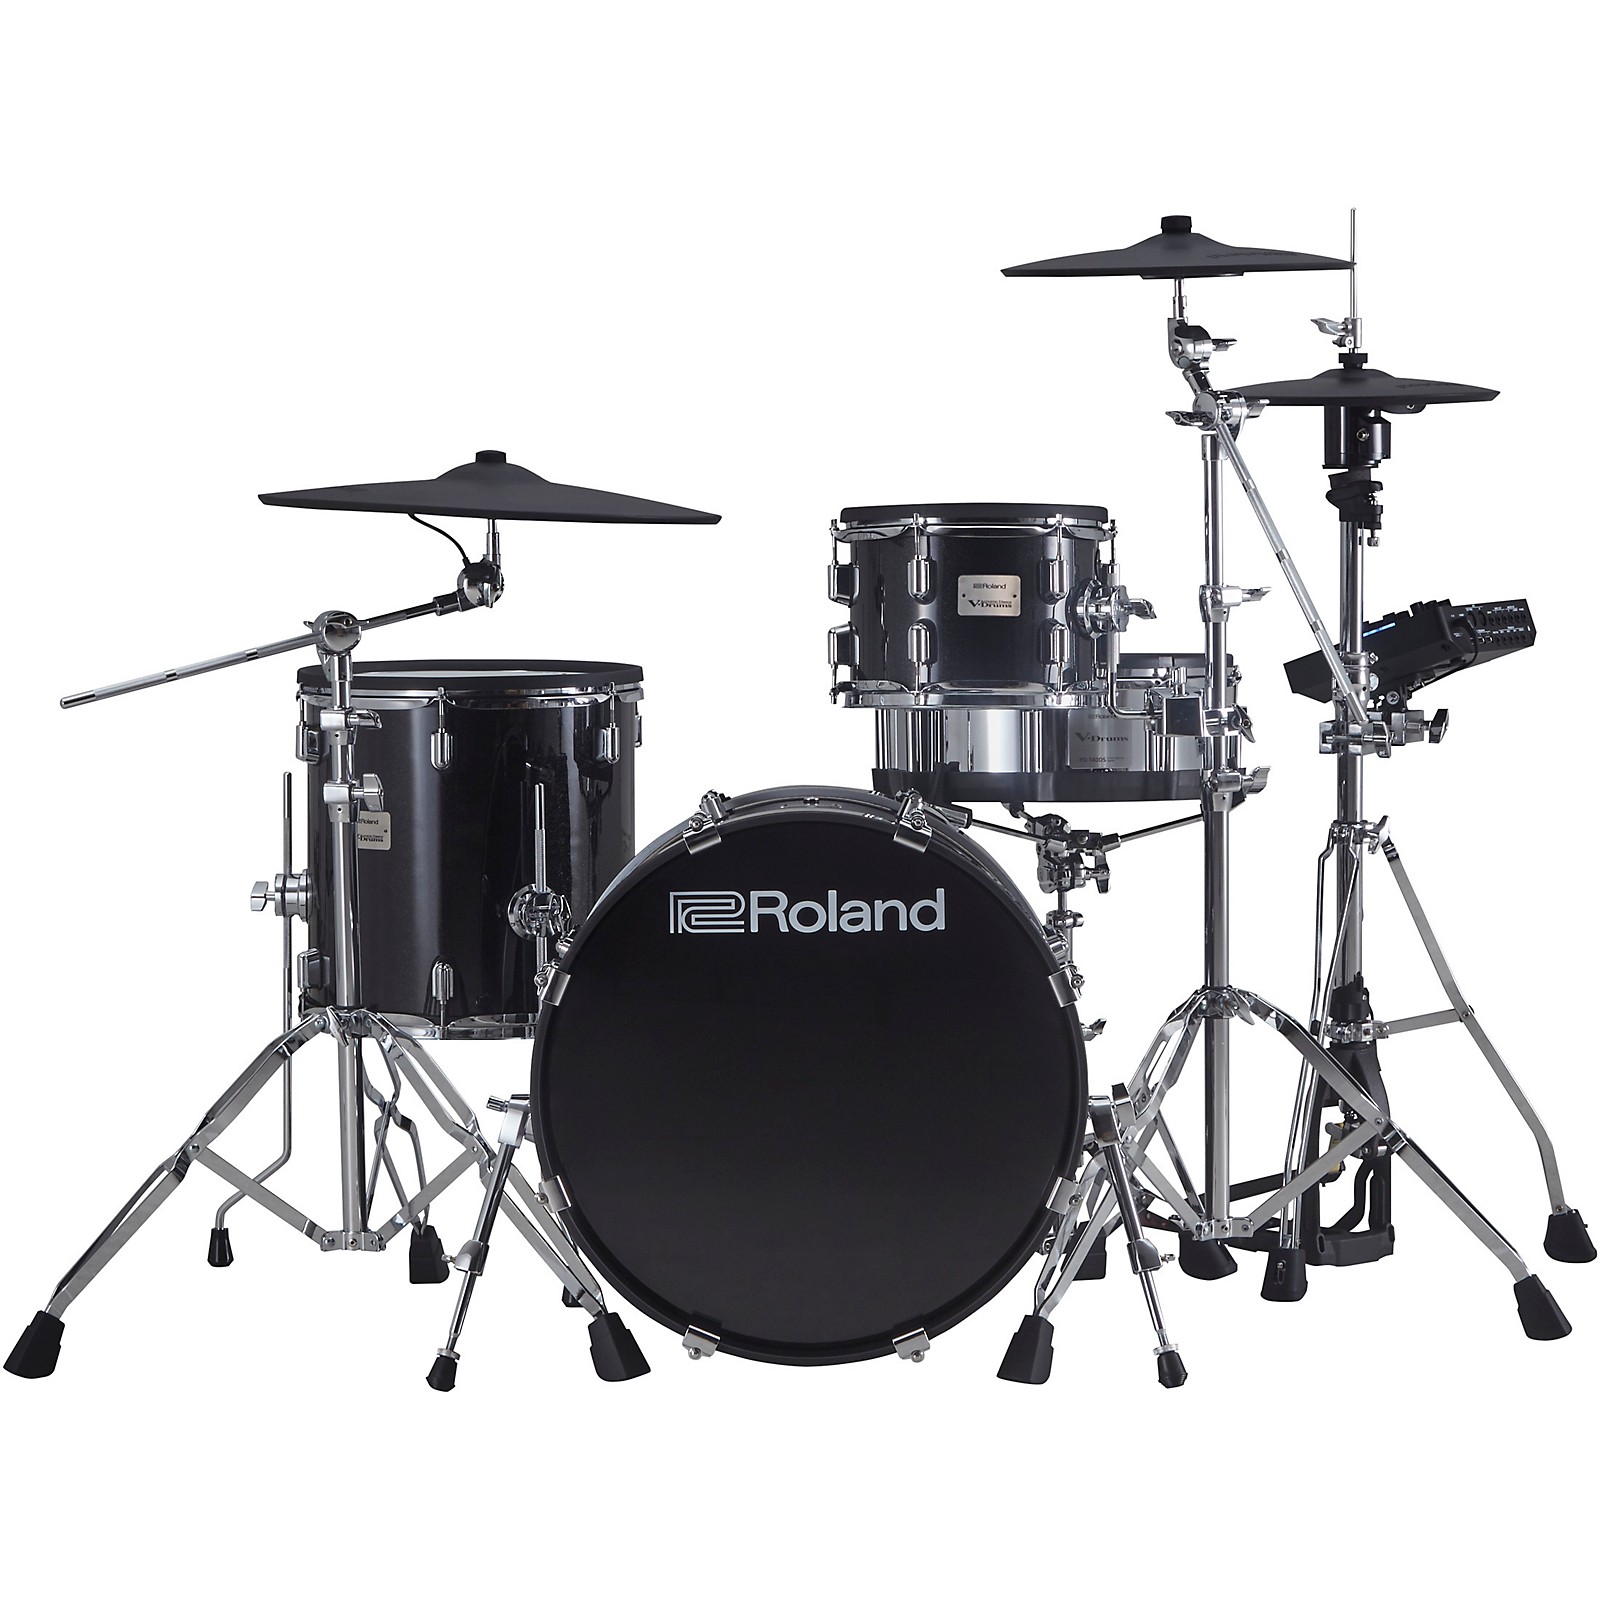 Drum NOT Included Skin Wrap Compatible with Roland PD-128 Drum Baja 0014 Purple